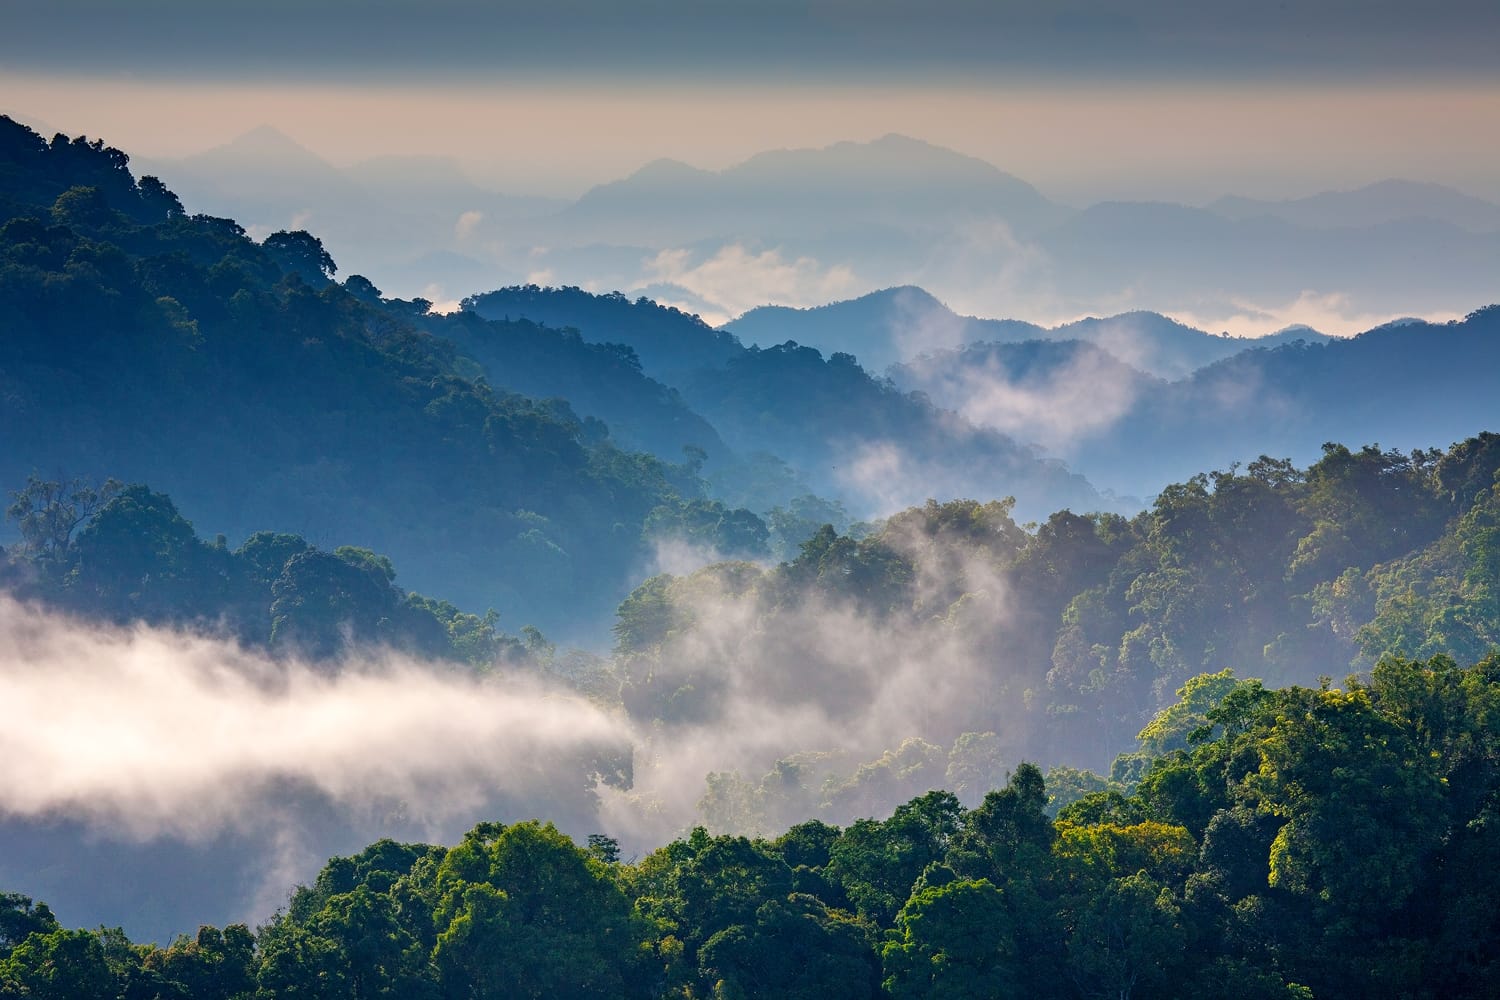 Morning Mist at Tropical Mountain Range,This place is in the Kaeng Krachan national park,Thailand